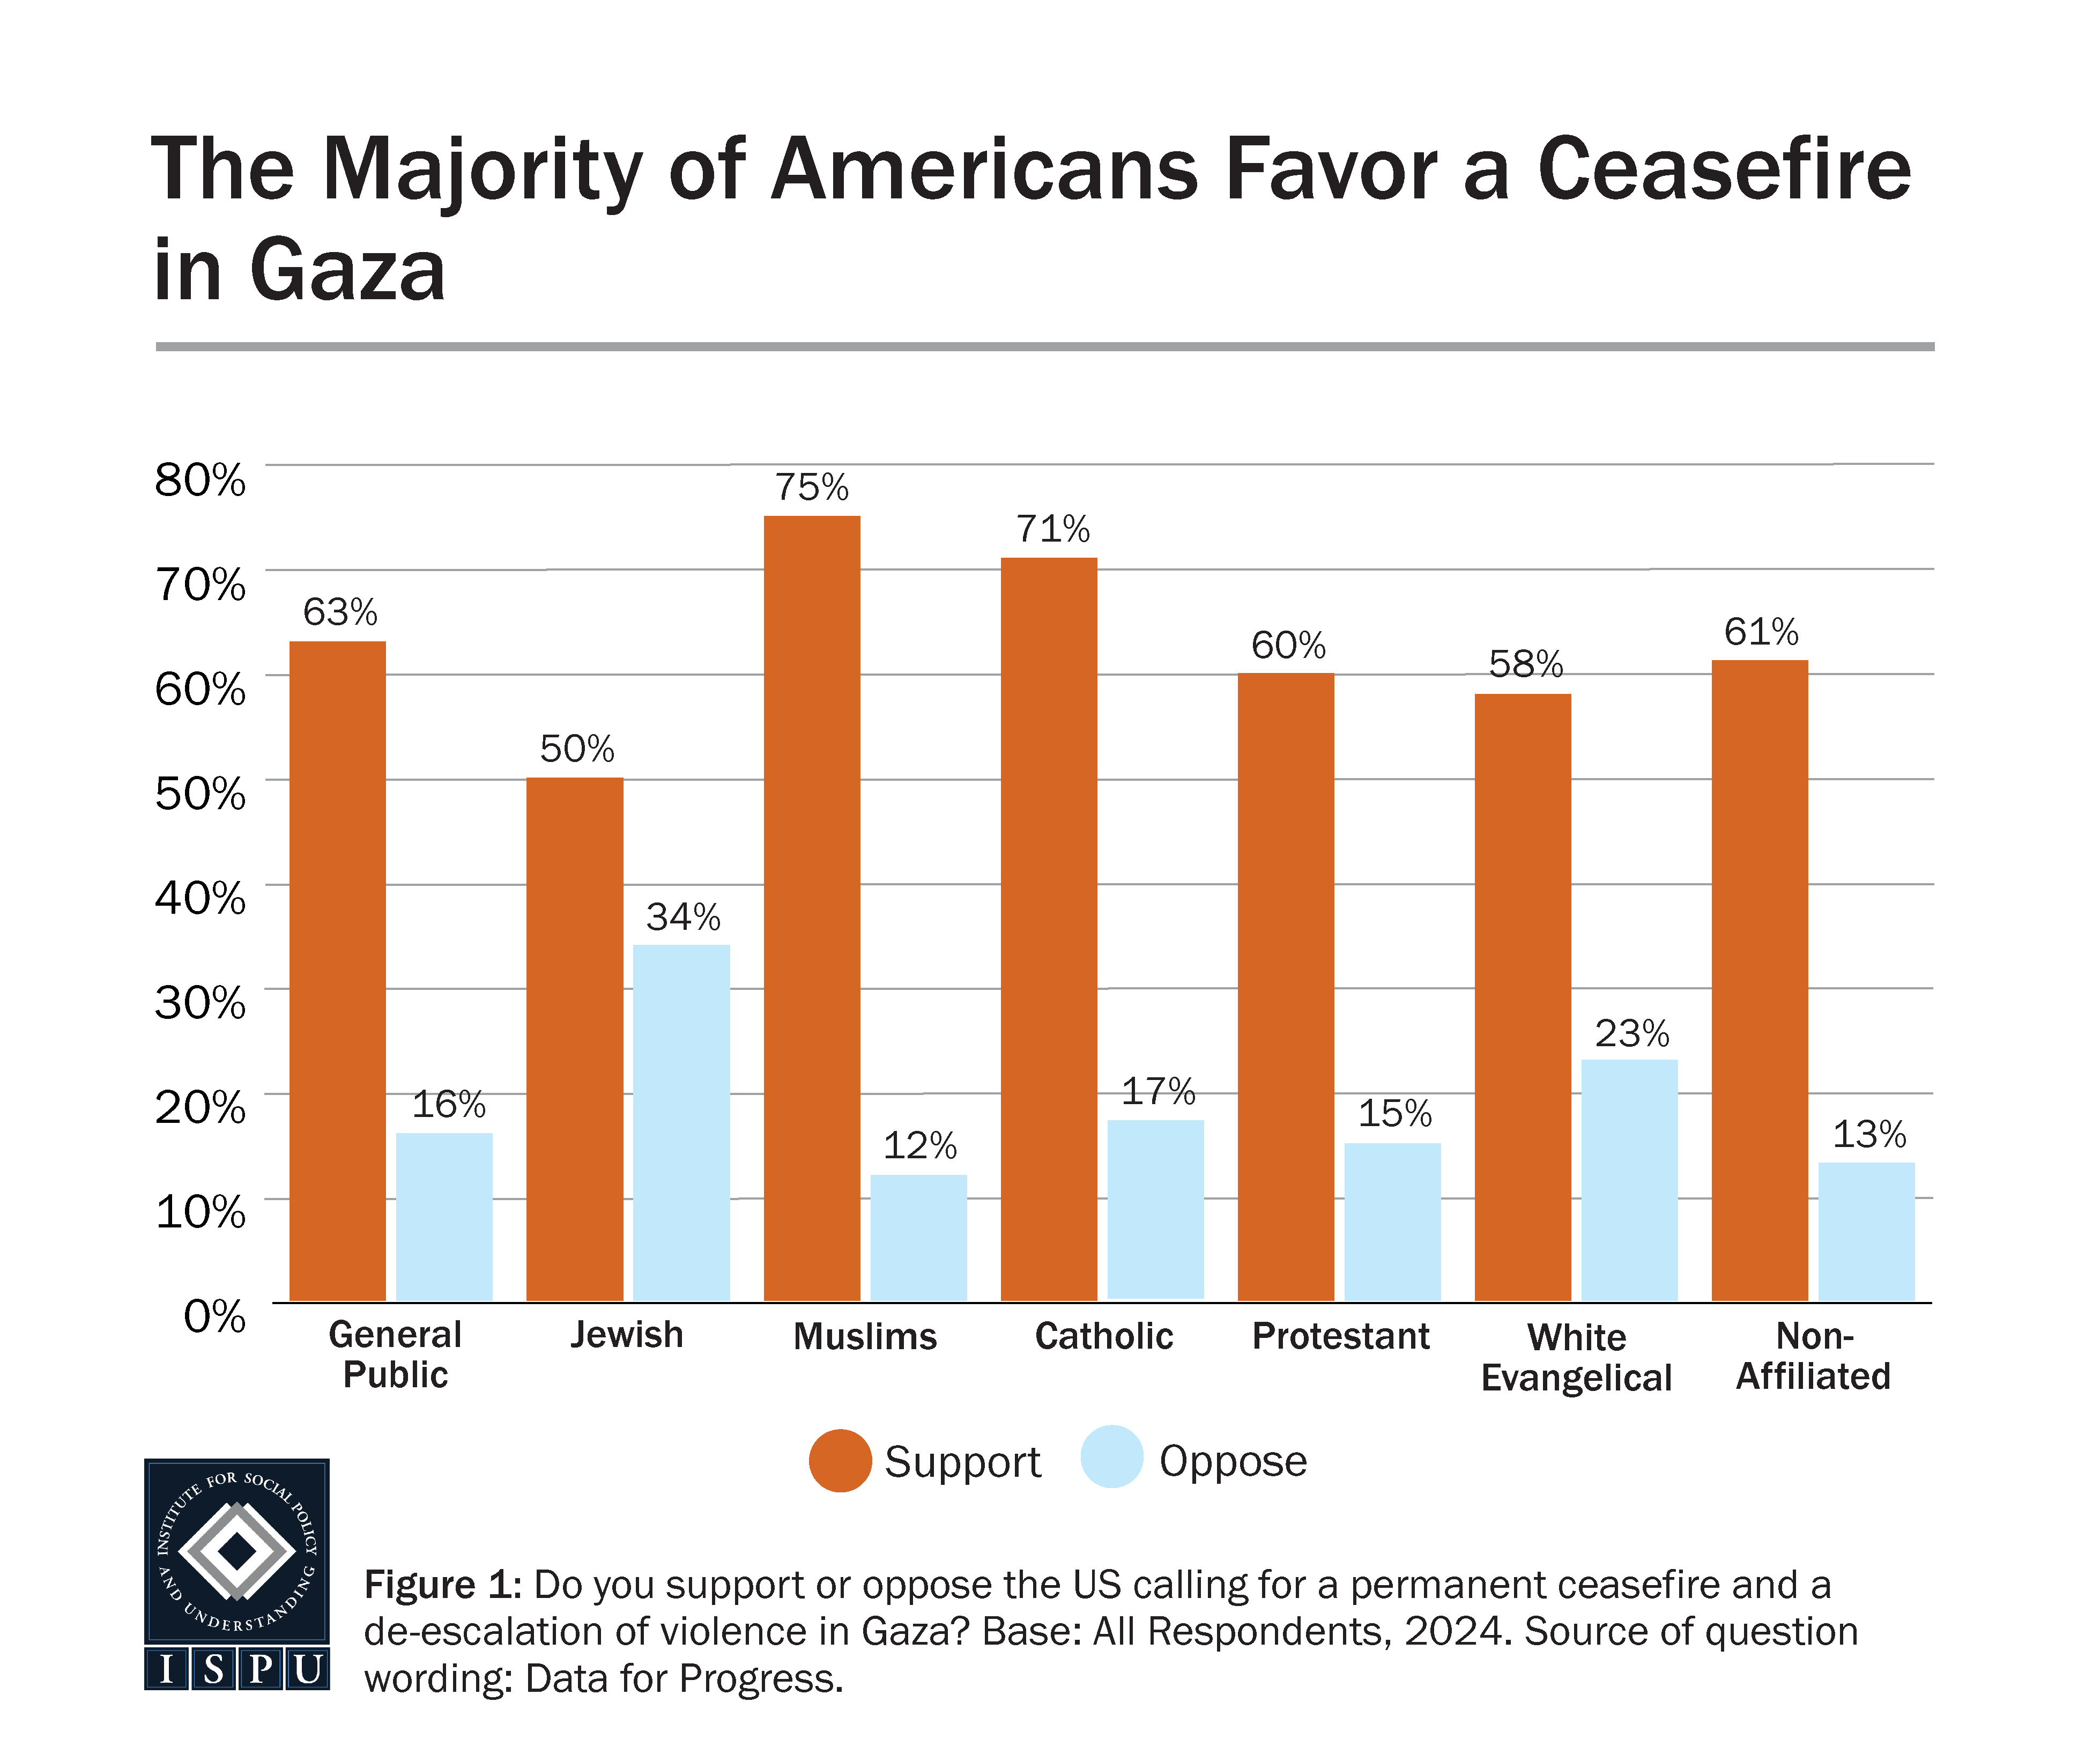 A bar graph showing the proportion of American religious groups that ‘support’ and ‘oppose’ the US calling for a permanent ceasefire in Gaza.